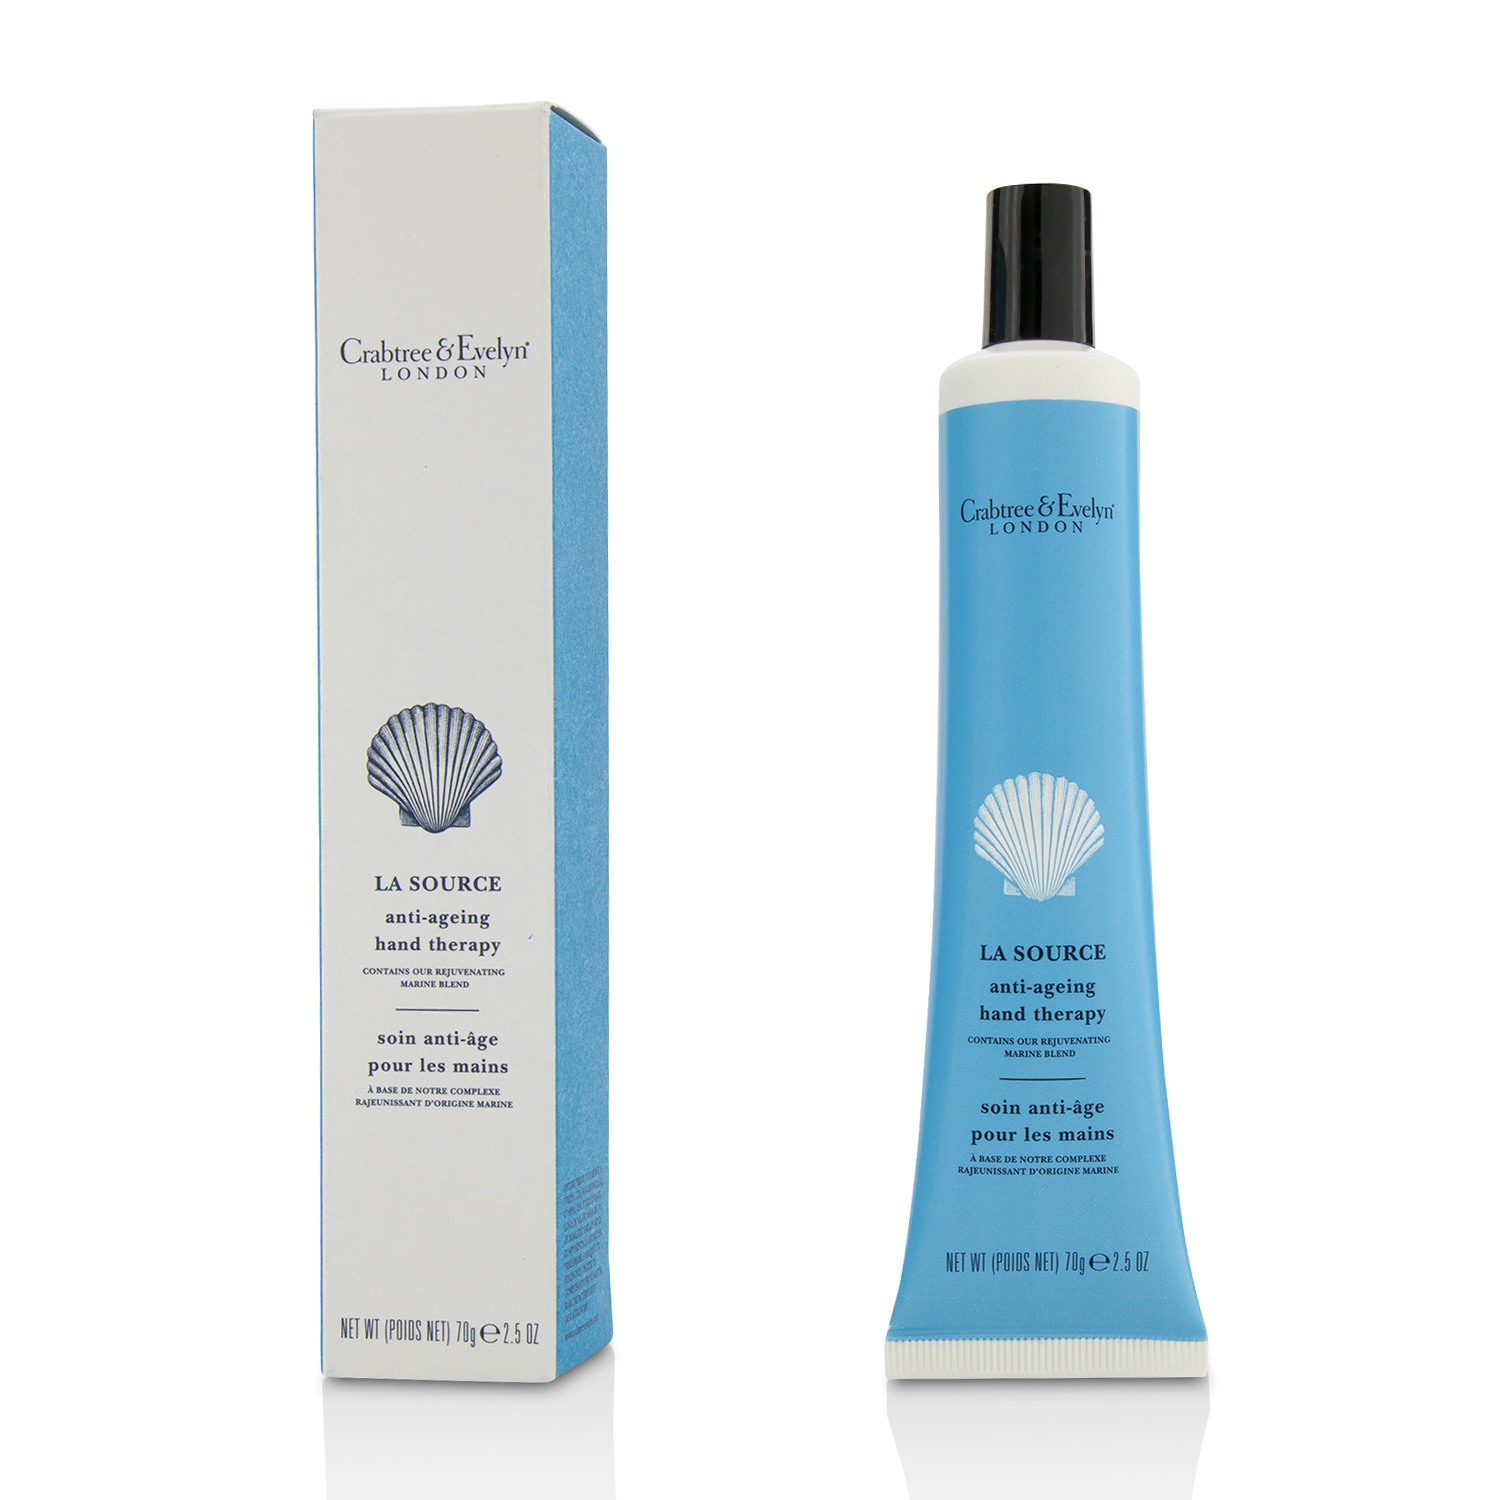 La Source Anti-Ageing Hand Therapy Crabtree & Evelyn Image